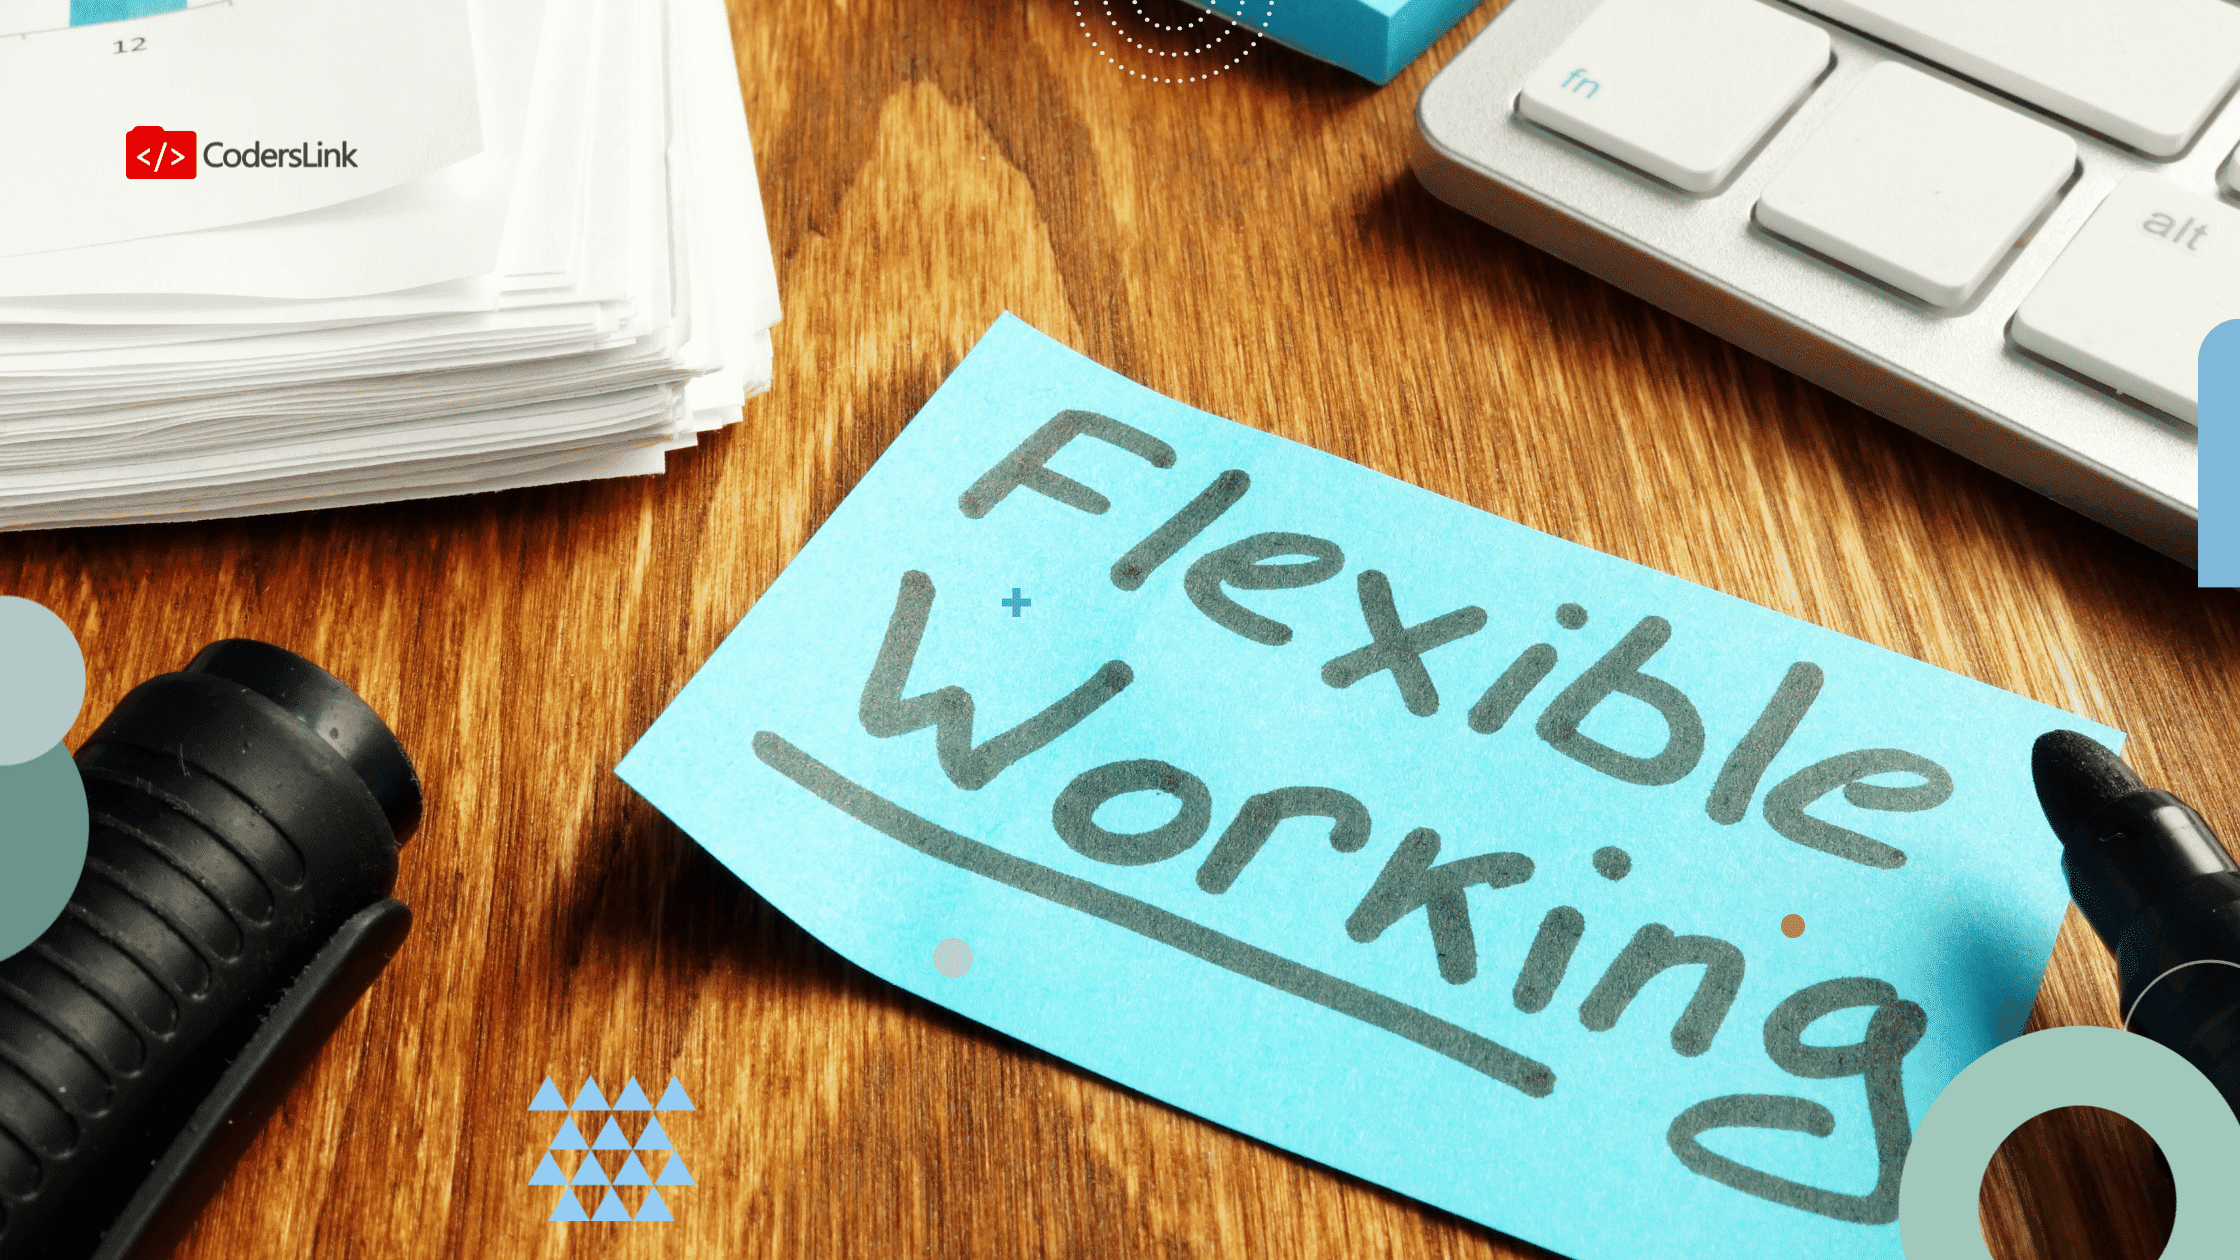 Flexible working or flexi-work is a non-traditional setup where the working schedule is arranged based on the employee’s personal needs. In most cases, flexible working includes working from home, but it can simply mean having flexible working hours while coming to the office to do the job.